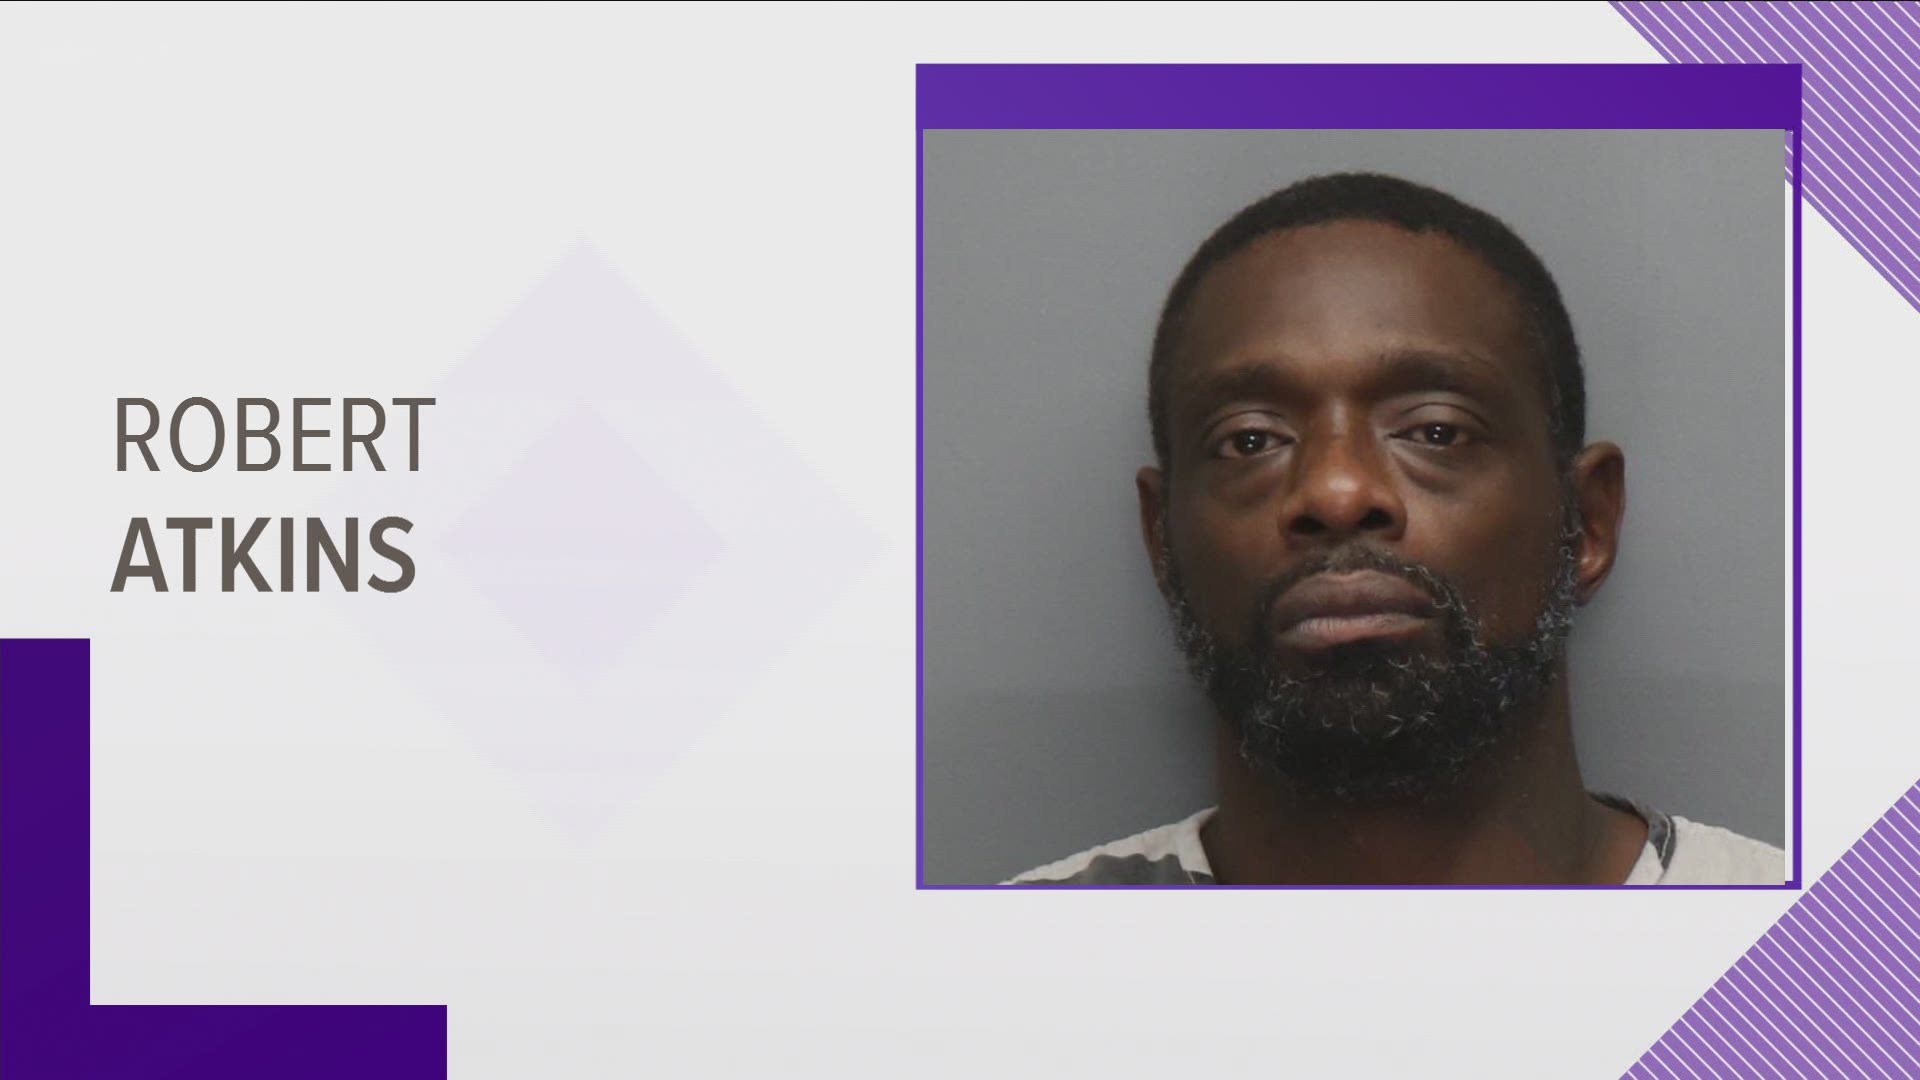 In 2019, investigators say Robert Atkins gave fentanyl to a woman who overdosed. Then in February of this year, police say Atkins shot and killed a 29-year-old.